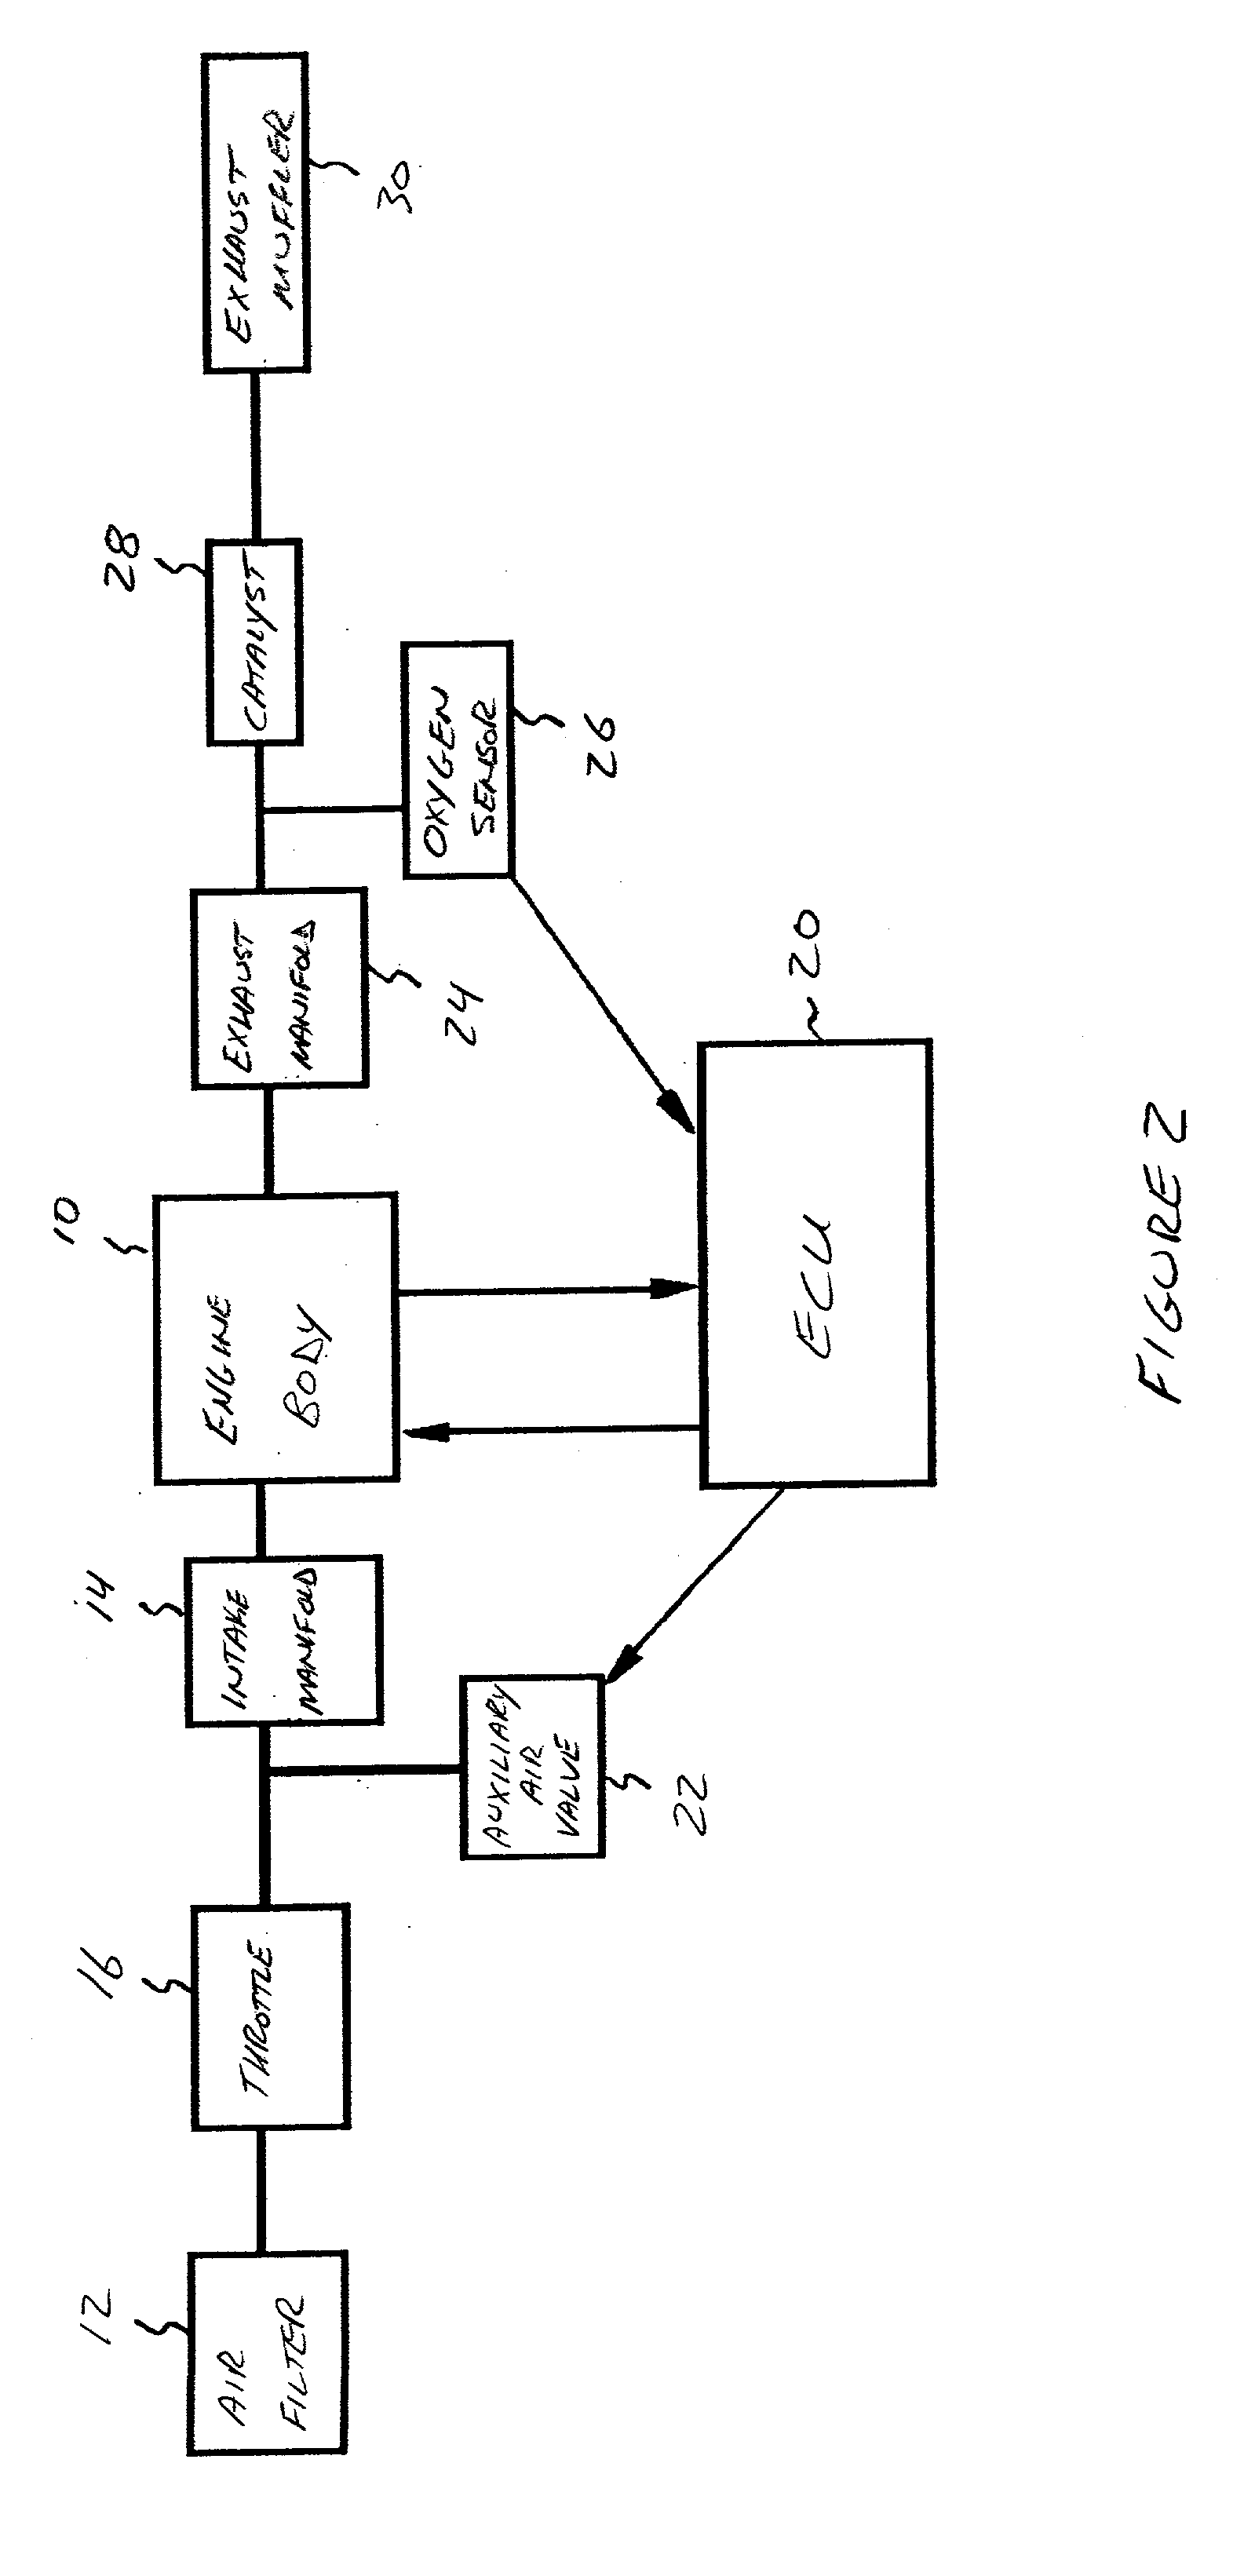 Control system for engine